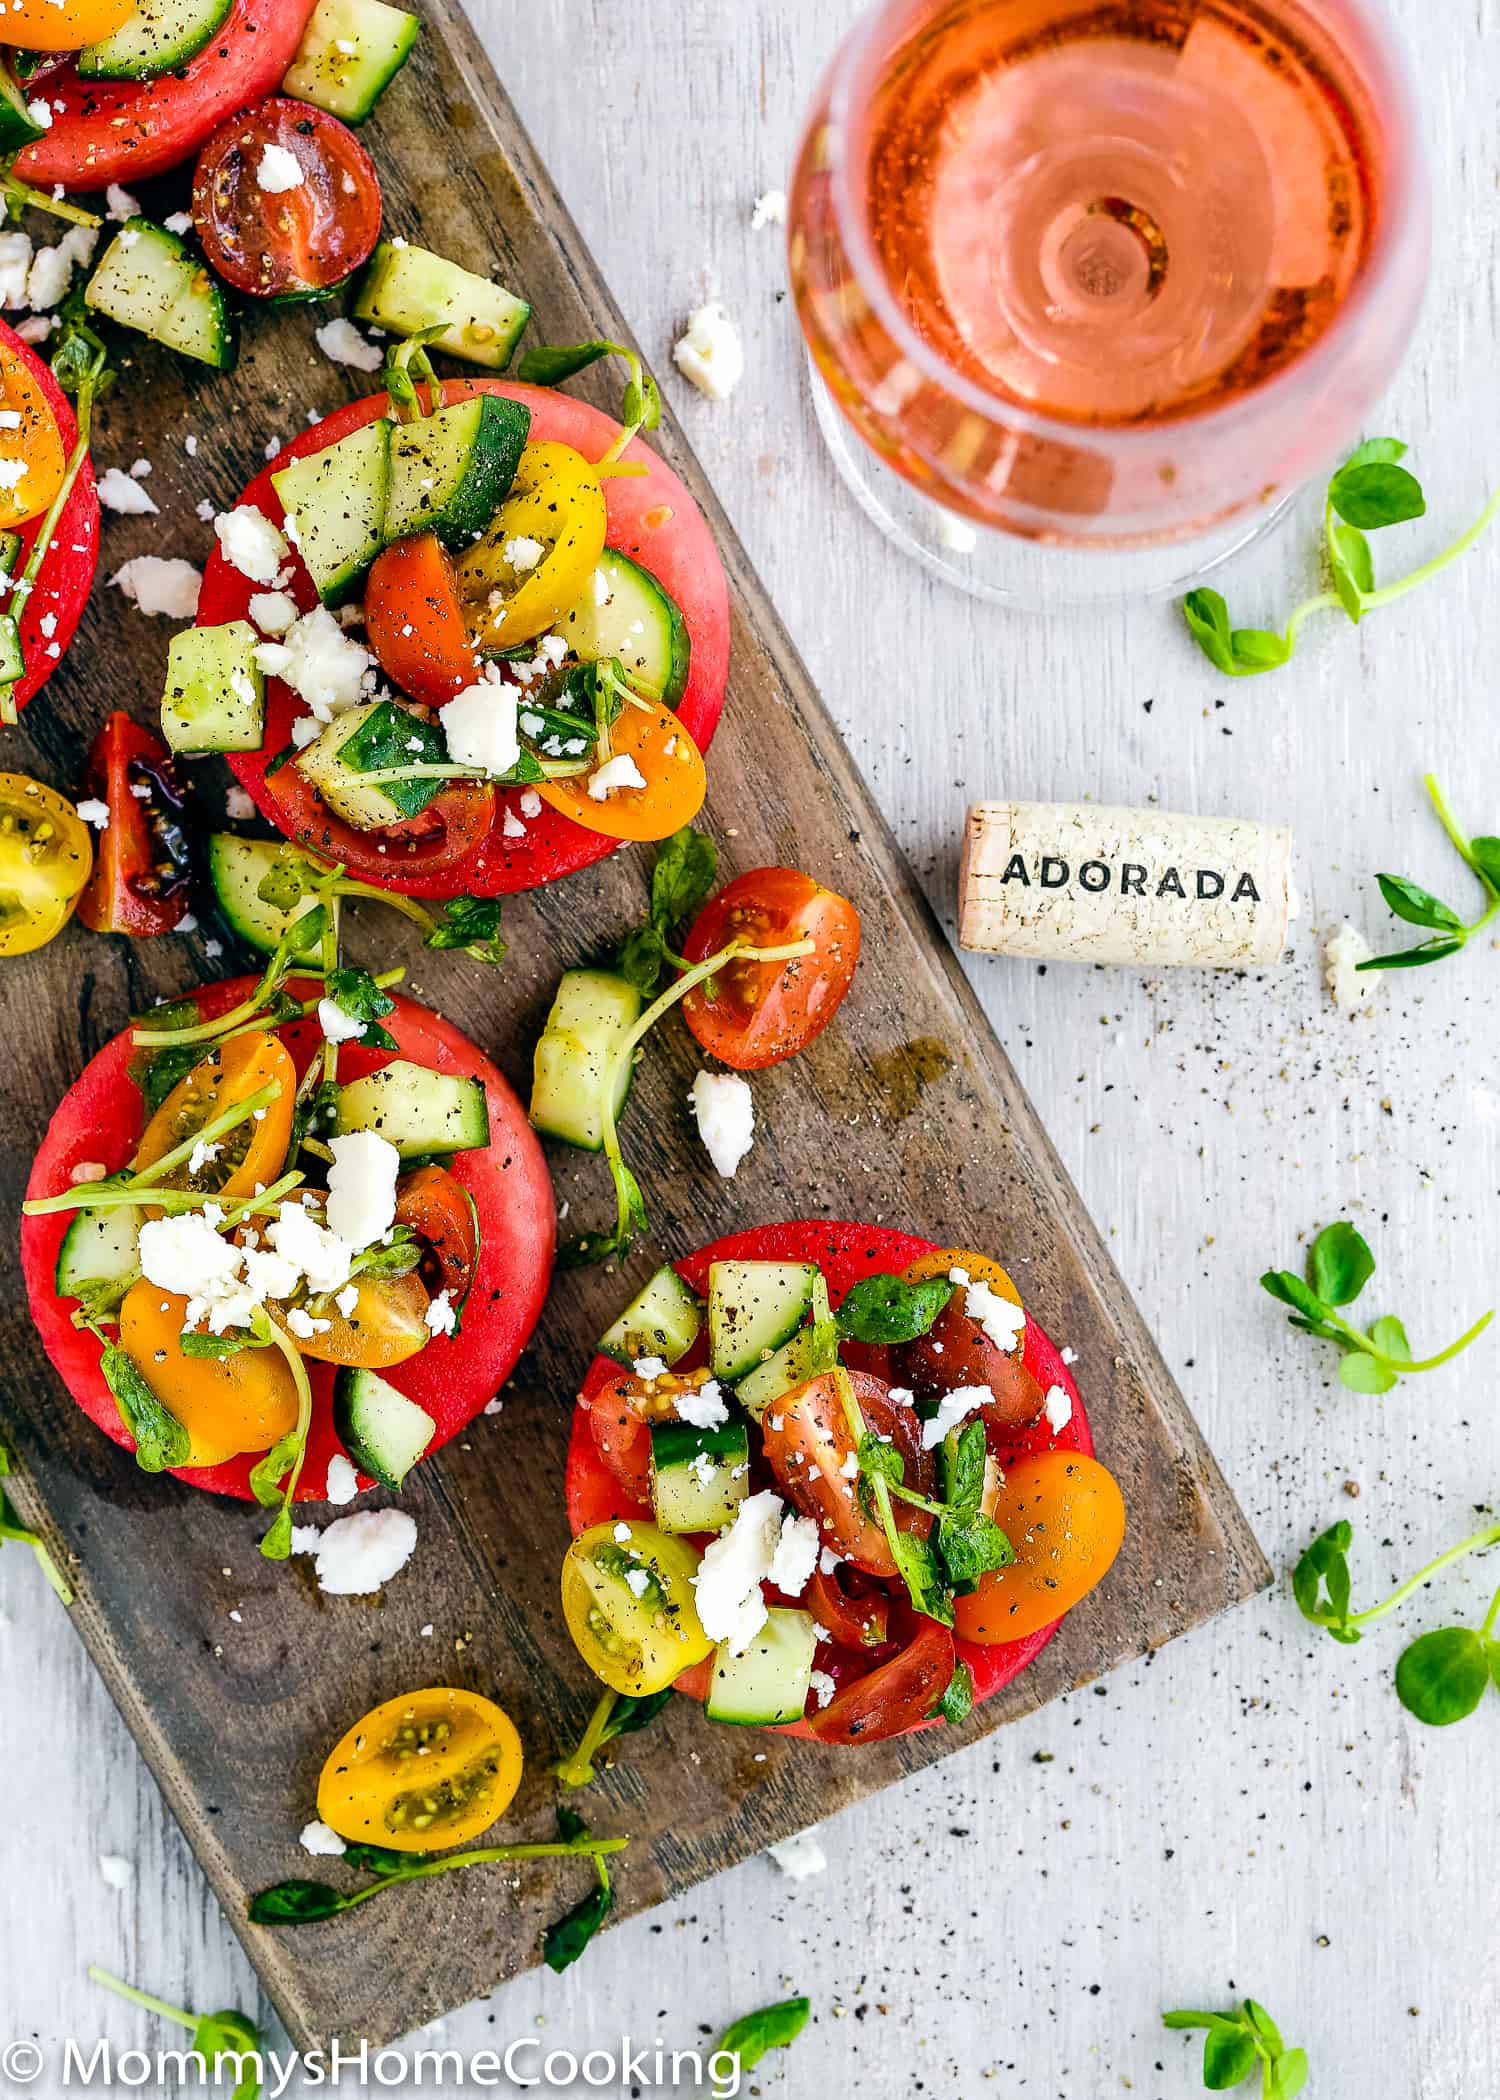 This Low-Carb Watermelon Bruschetta is sweet, savory, fruity, salty, zesty and totally delicious! All you need are a few ingredients and 15 minutes, or less, of chopping. Perfect idea for a super fun Girls Night In, for potlucks, or brunch, lunch, or dinners. Pair it with a glass of rosé for an unforgettable bite. https://mommyshomeccoking.com